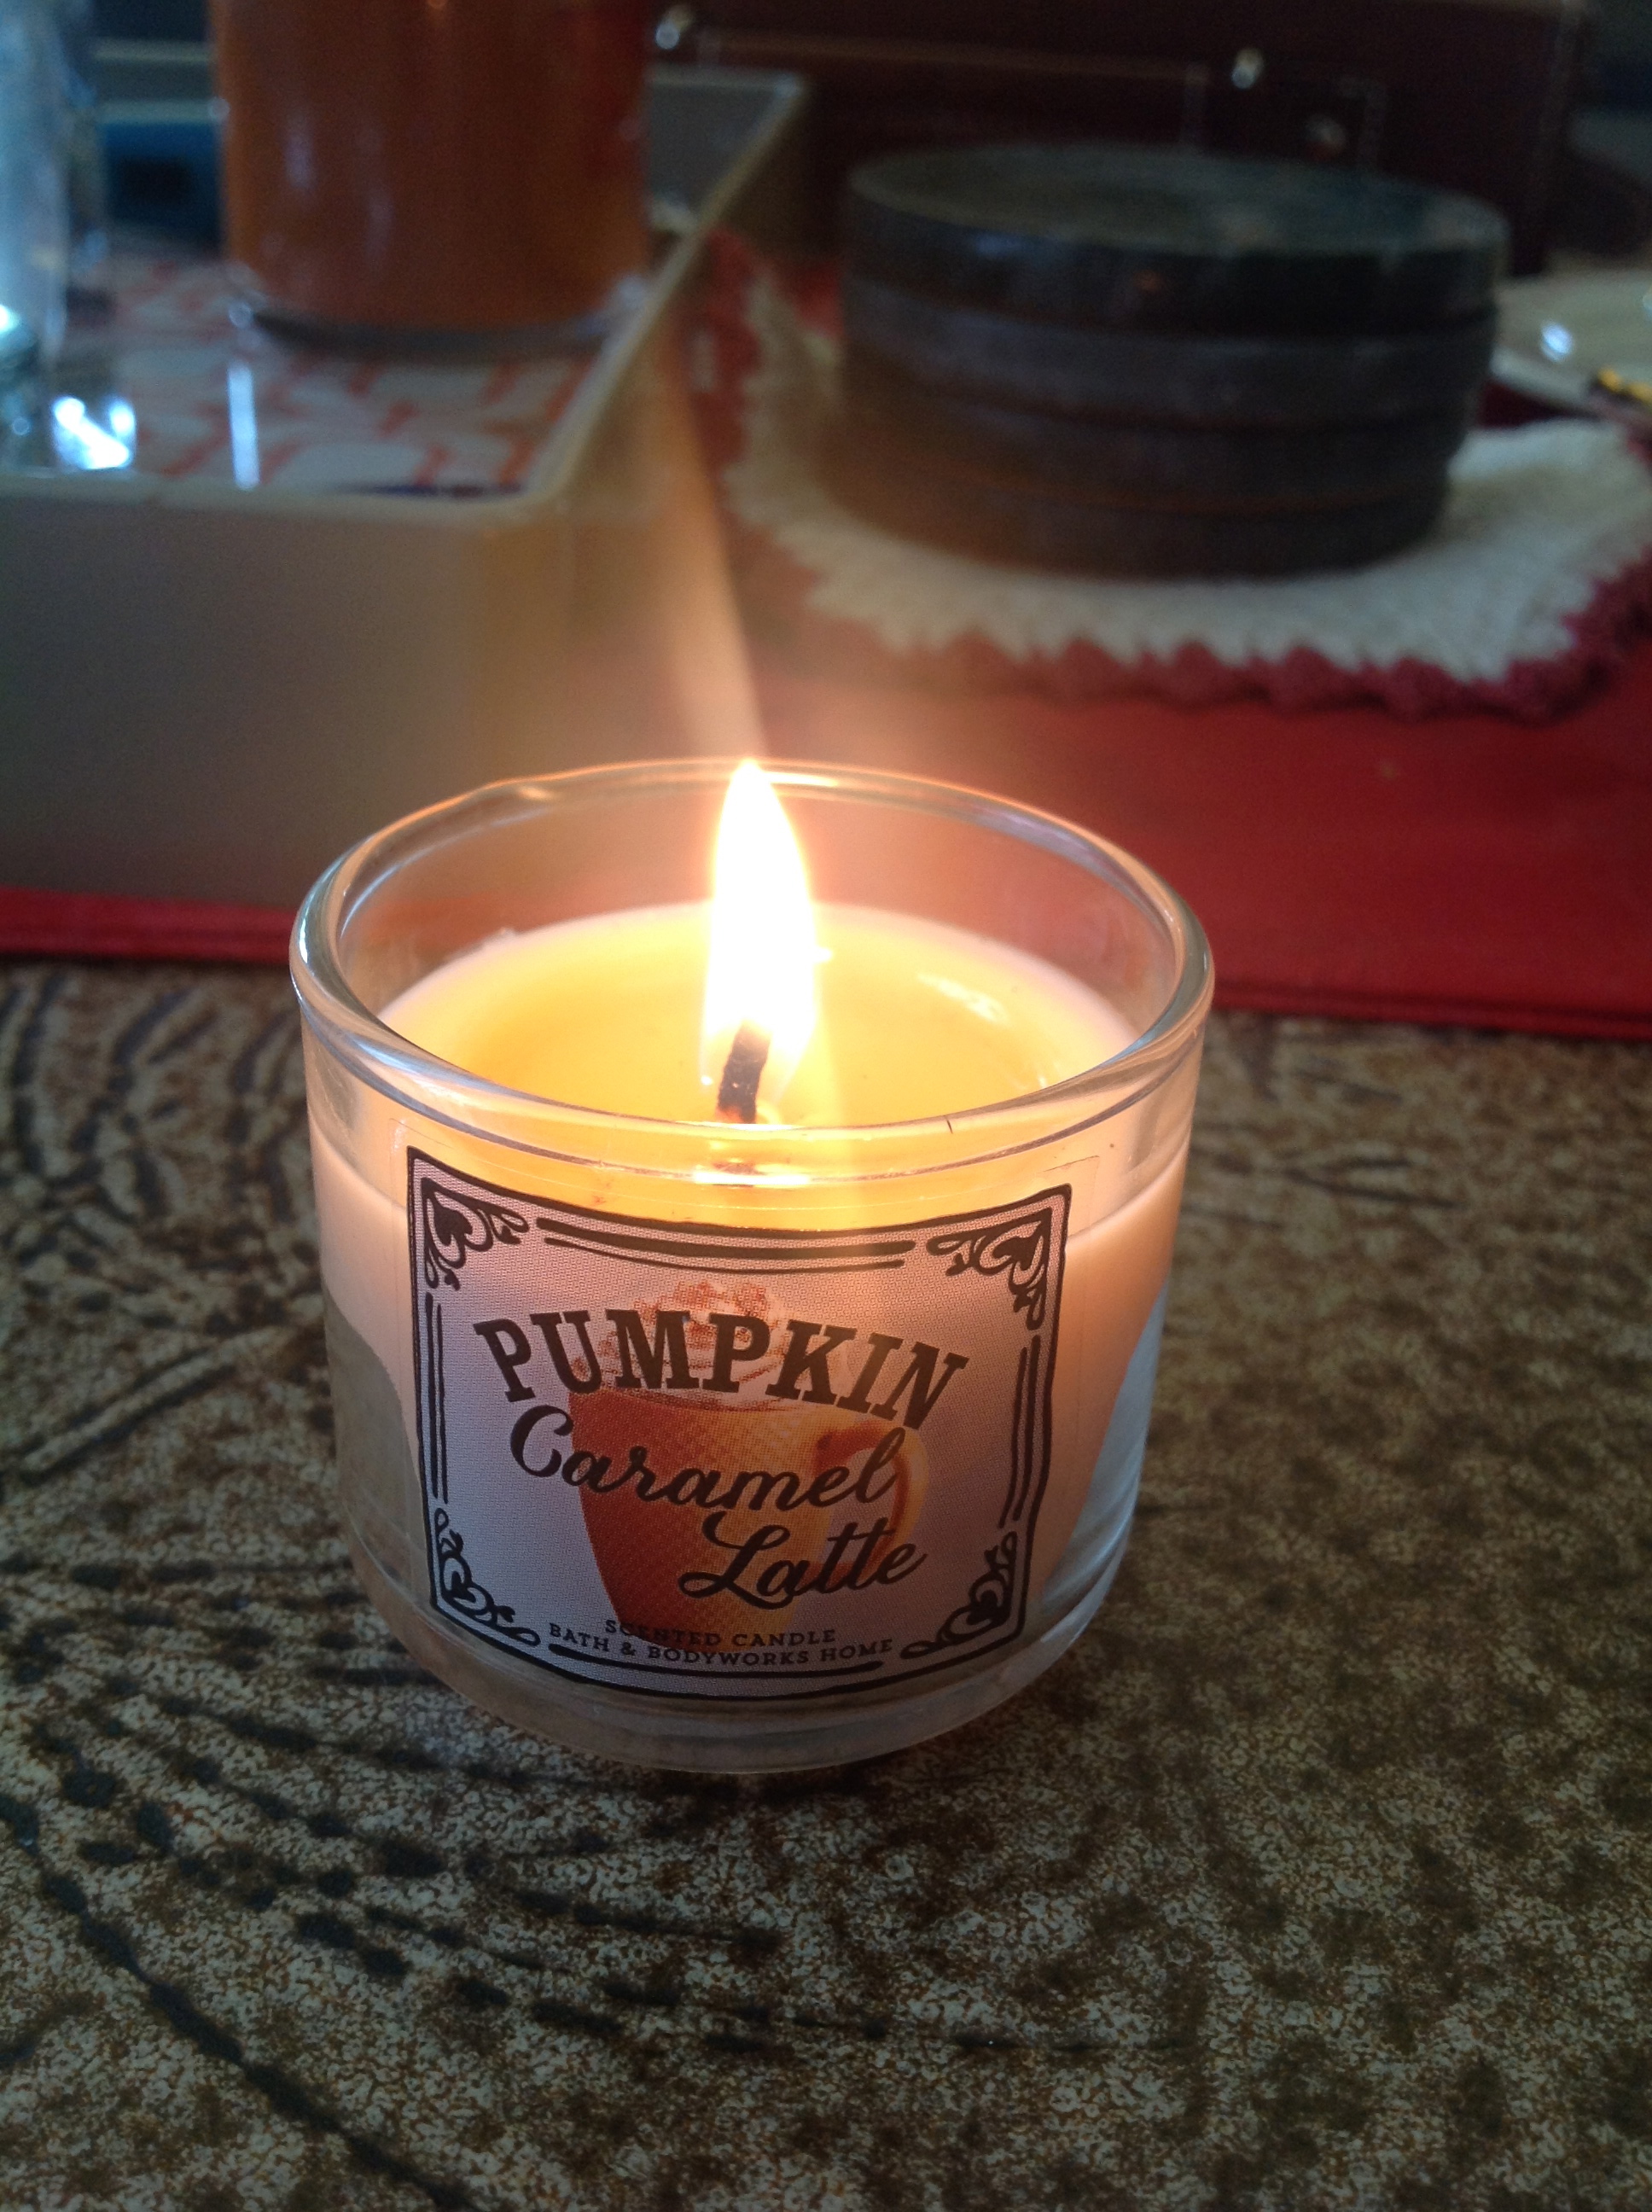 I got a free candle coupon from Bath and Body works and I picked this one! Smells delicious! The hubs doesn't care for this one.